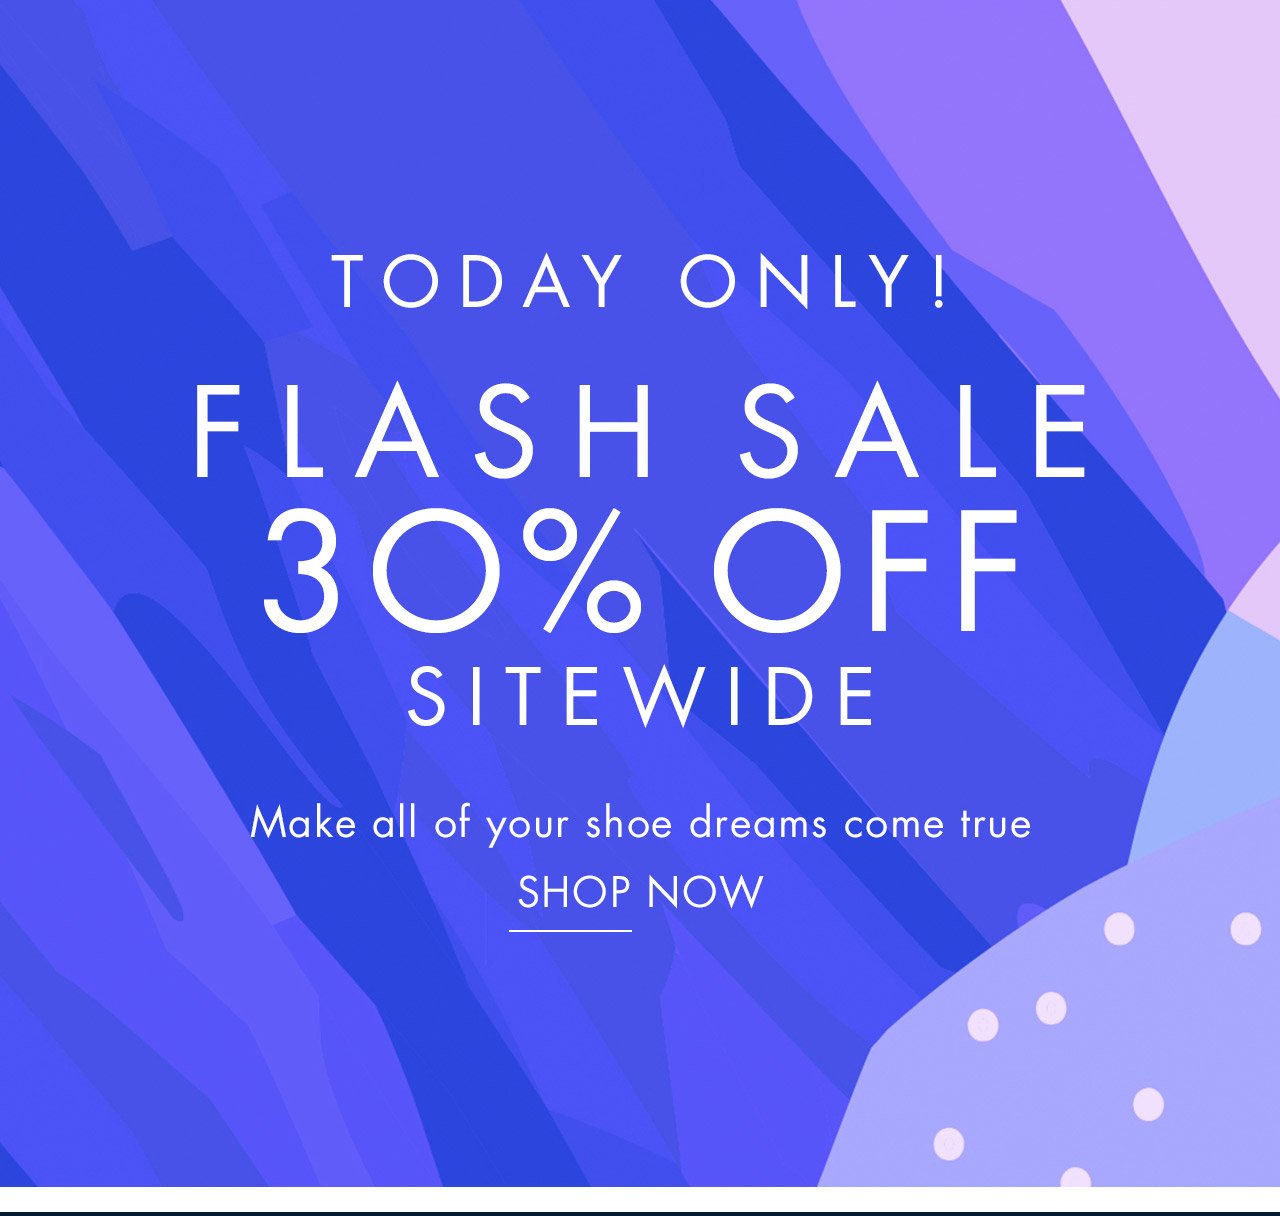 TODAY ONLY! Flash Sale - 30% Off Sitewide